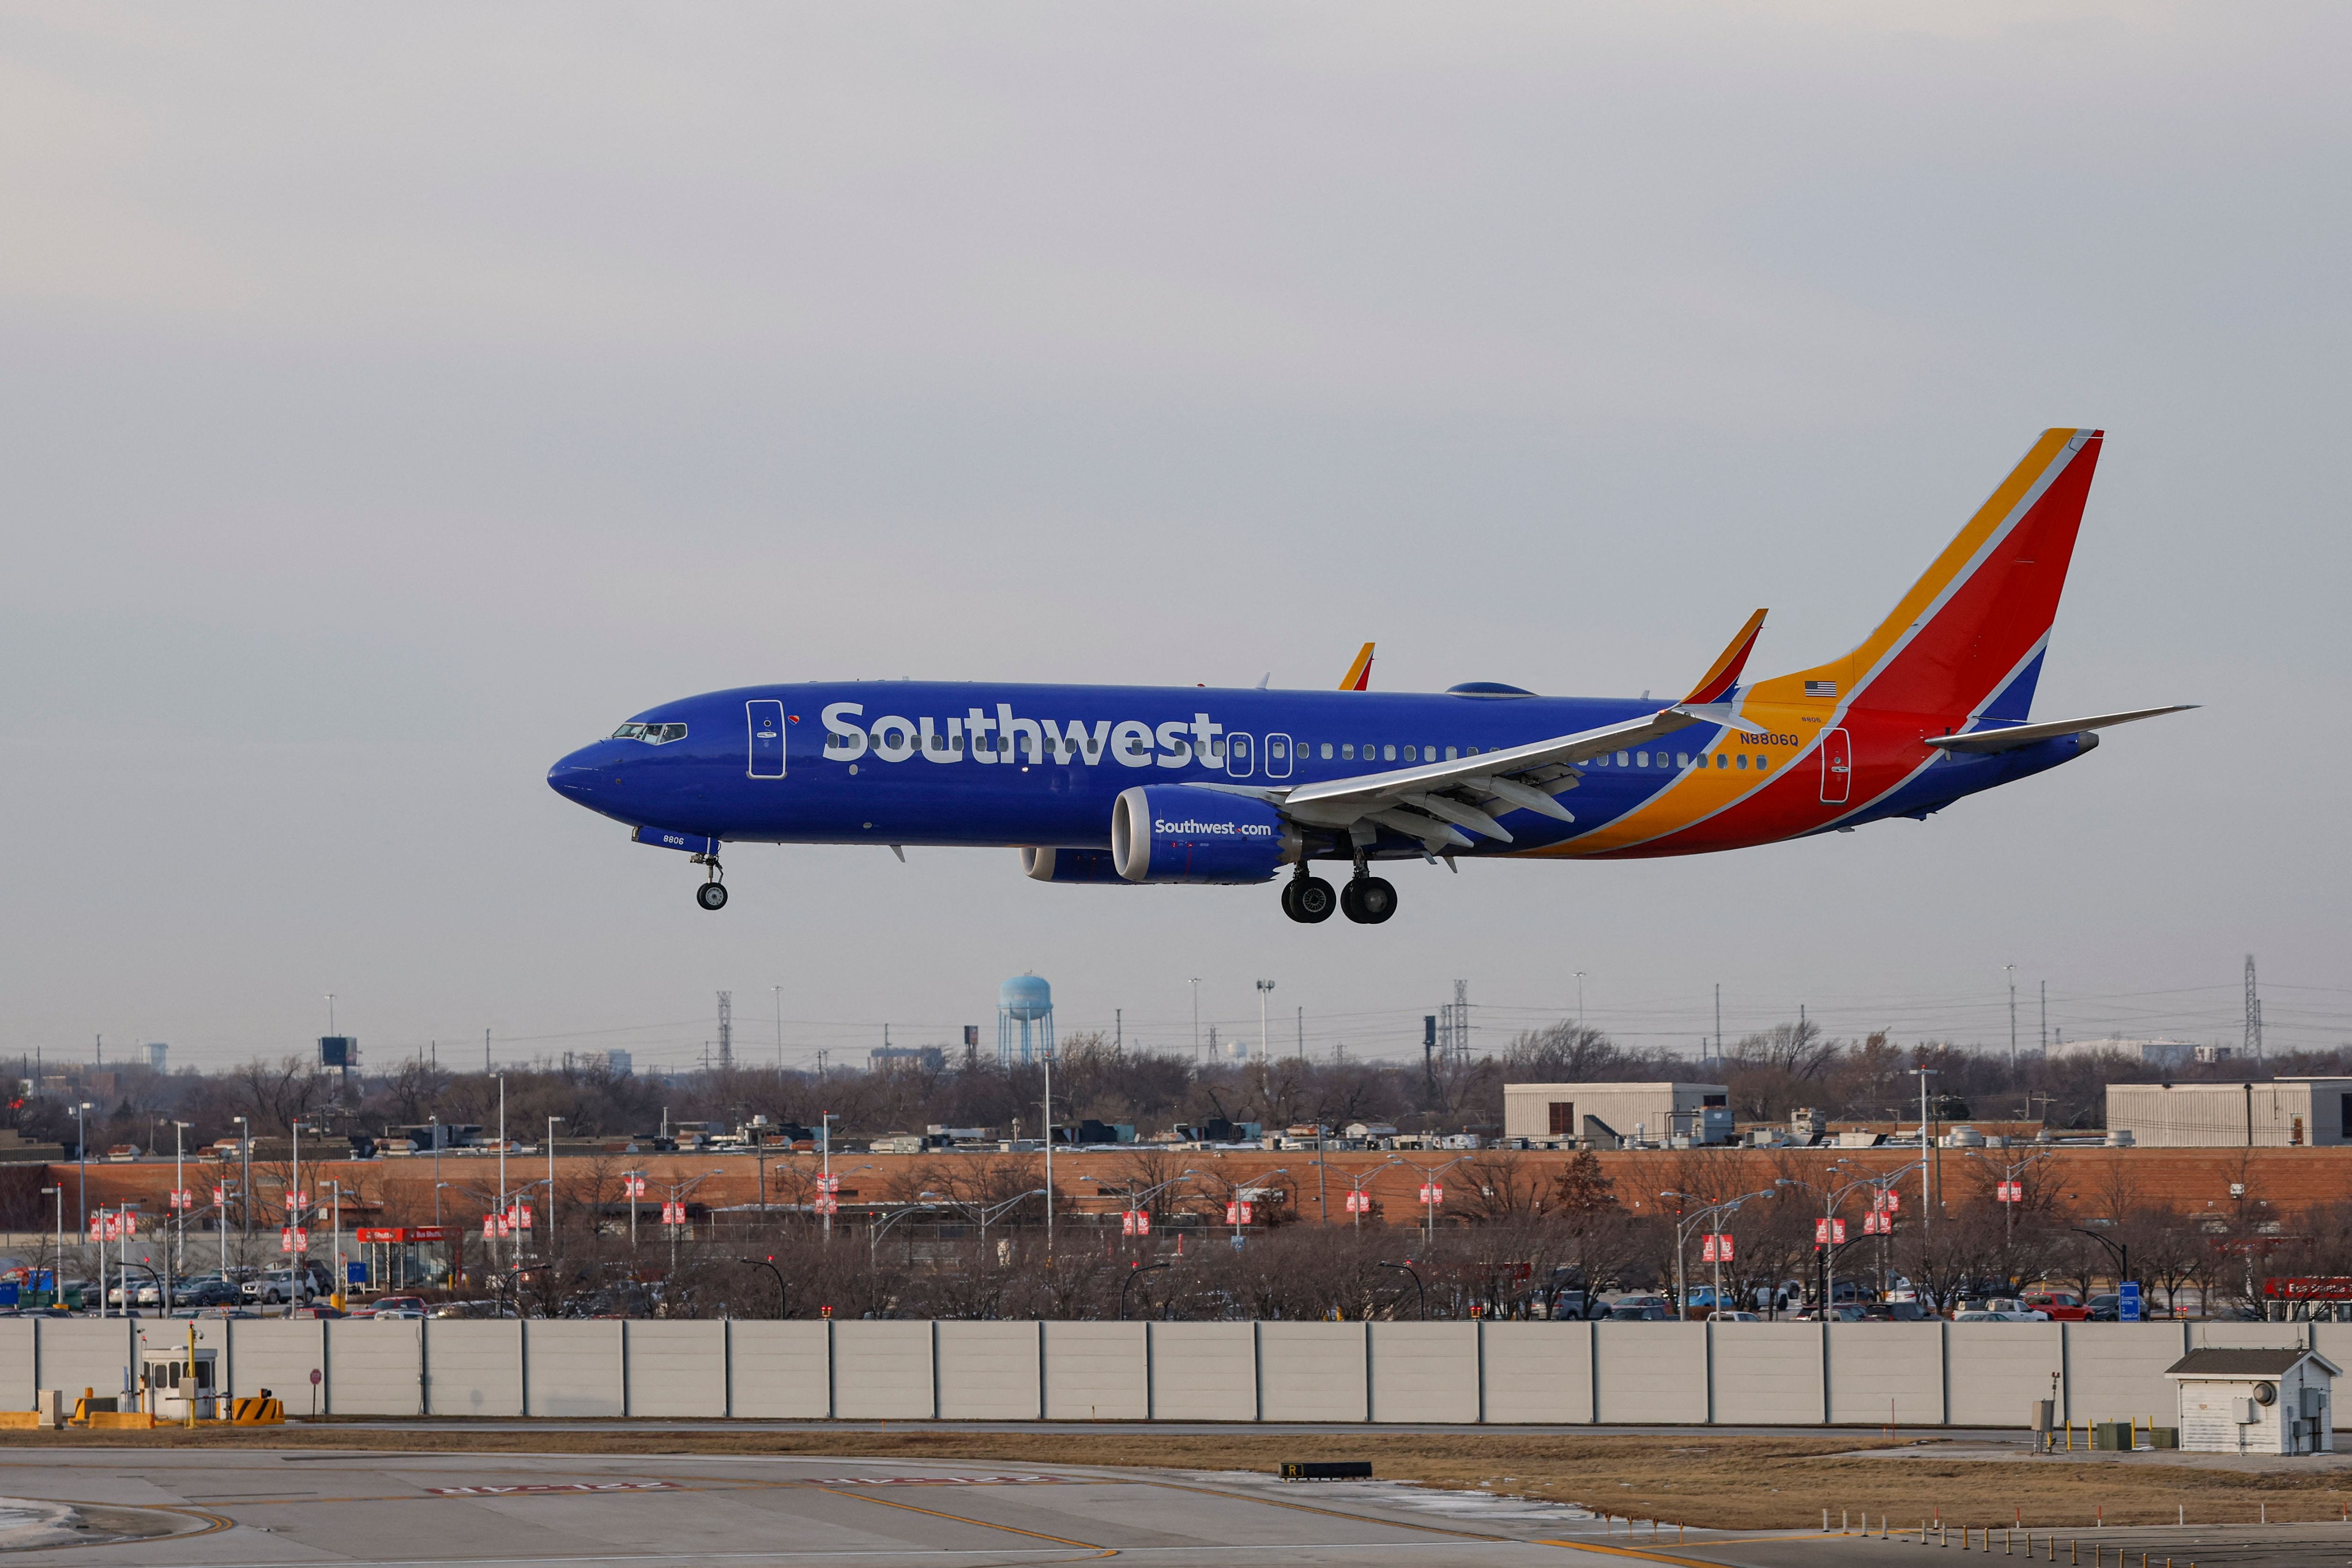 Southwest Airlines chief operating officer to testify before Senate Commerce Committee